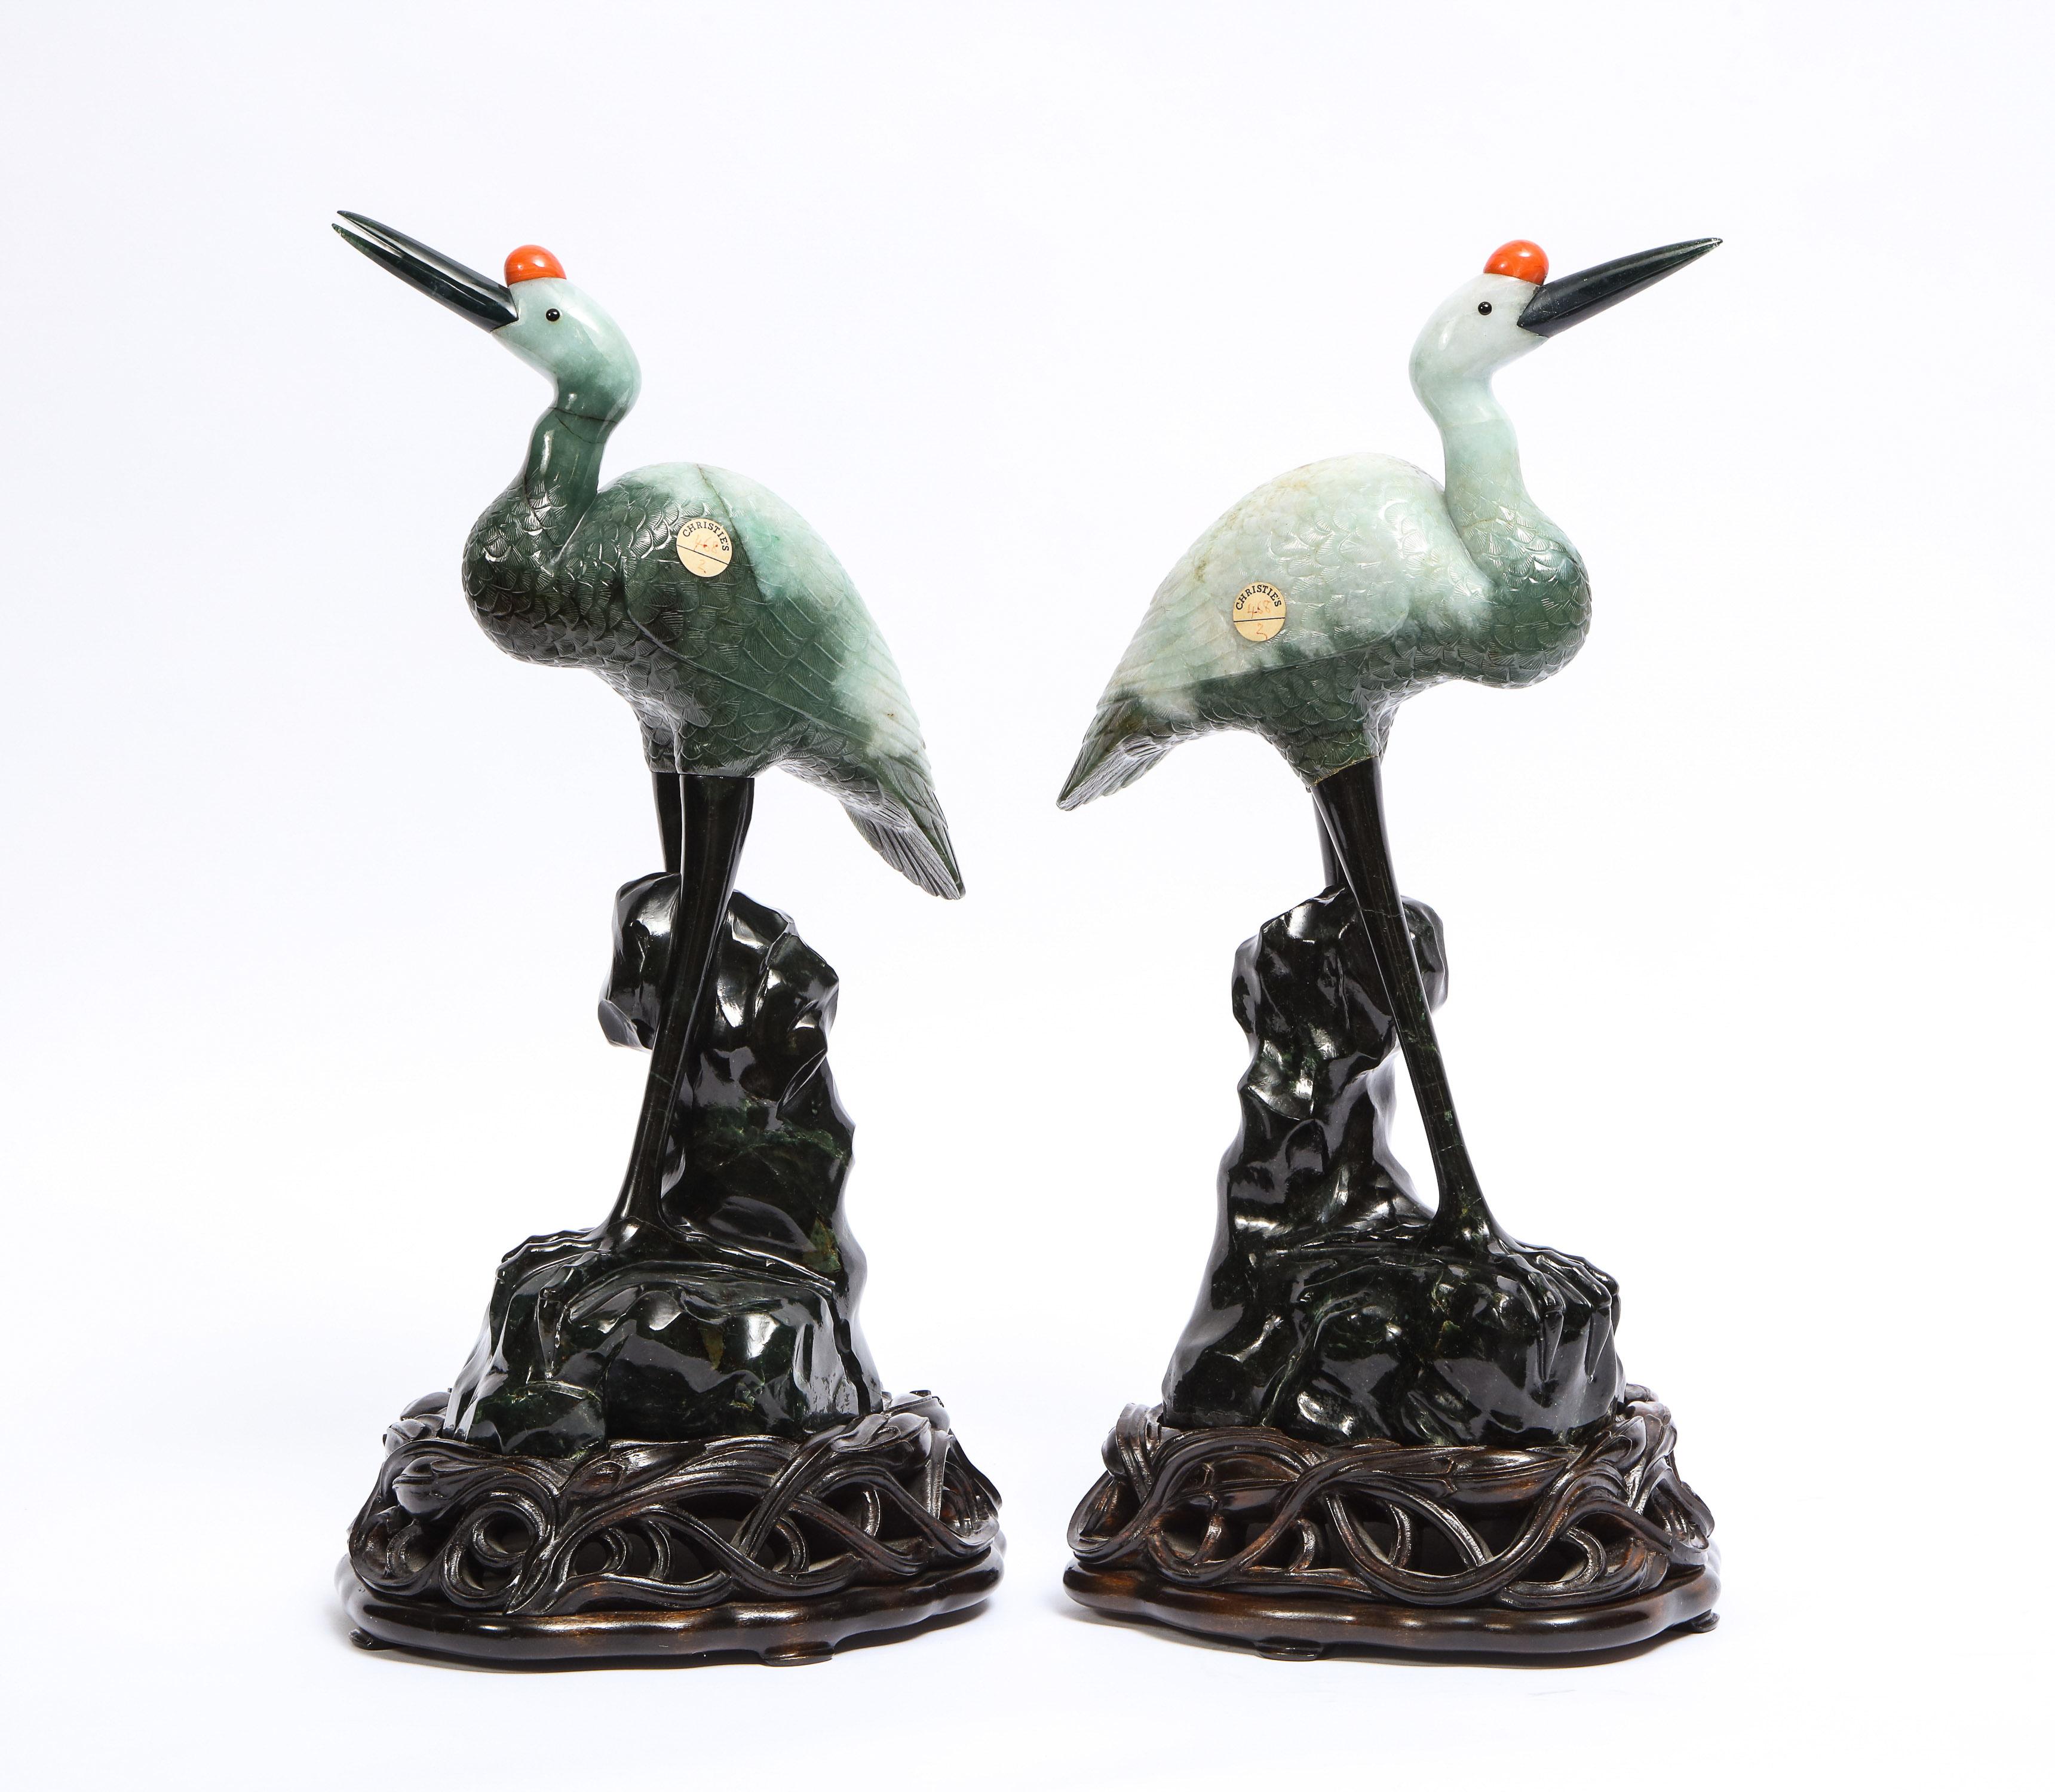 A fabulous pair of Antique Chinese mottled light green jadeite carvings of cranes on hand-carved wood stands. Each of pieced construction the body of mottled light green with an inset beak and red coral crown, supported on spinach jade legs, atop